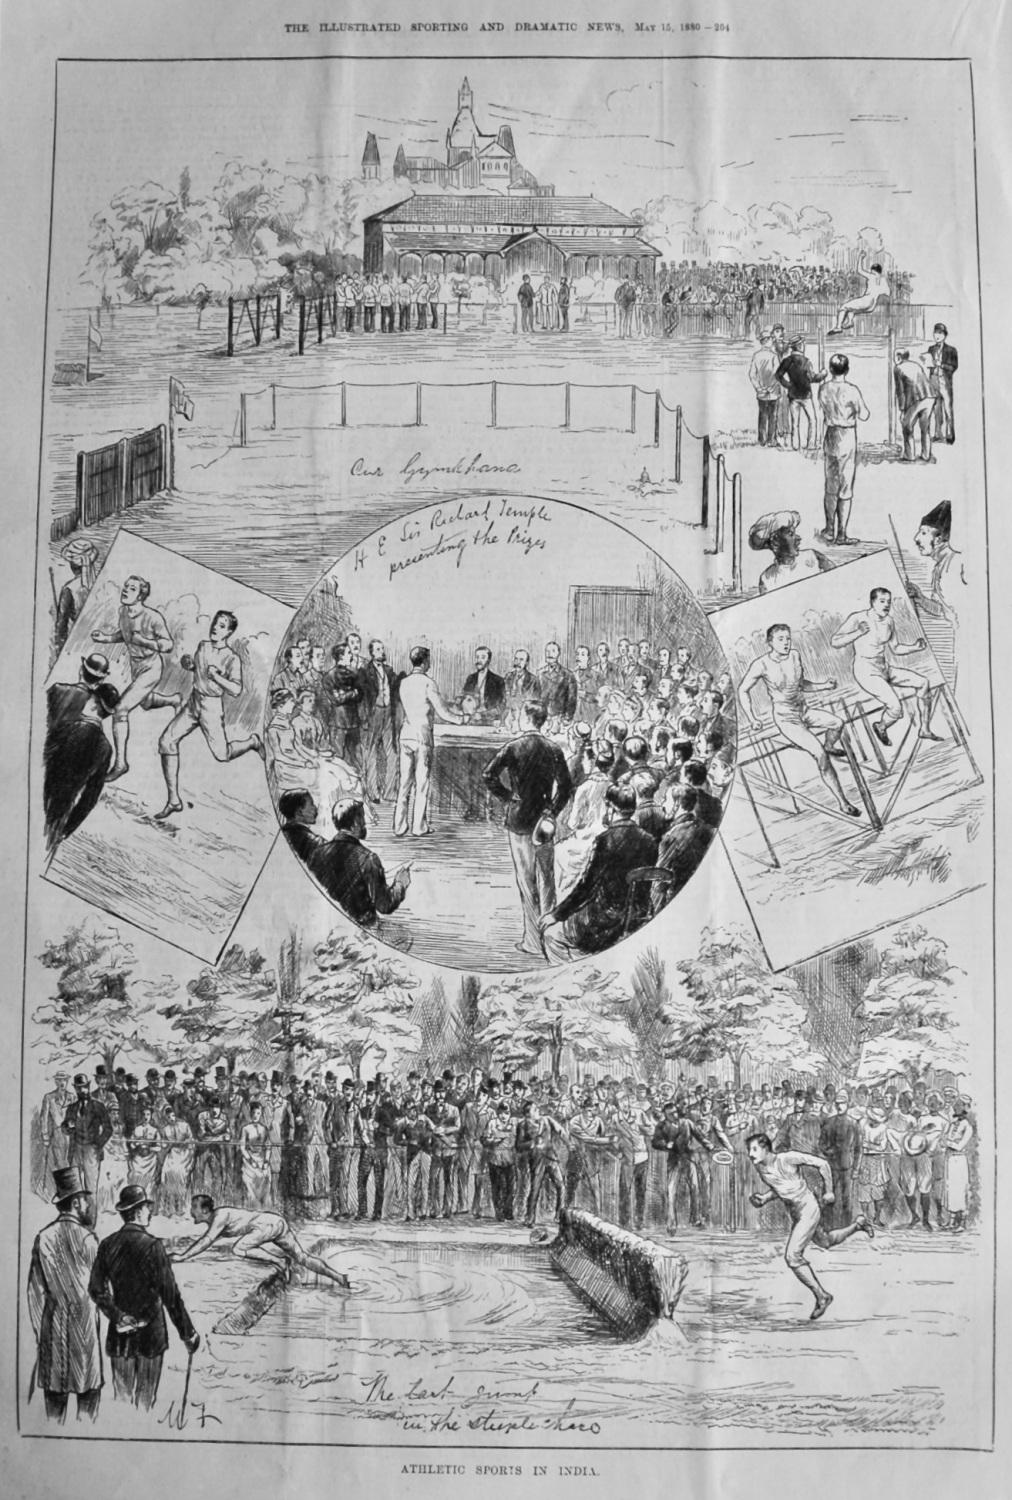 Athletic Sports in India. 1880.